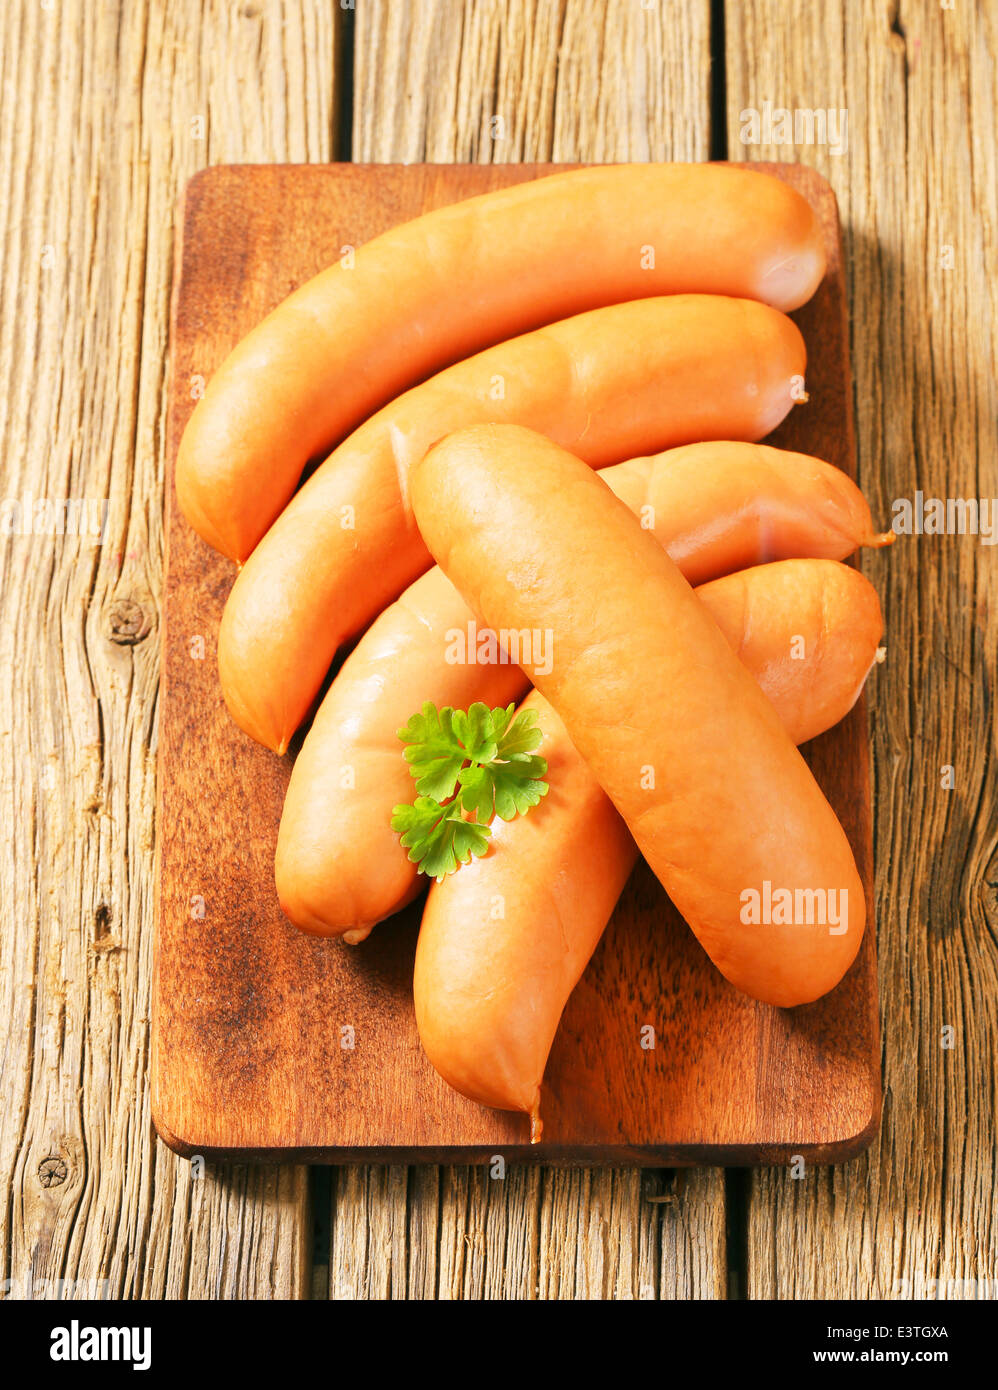 Lean smoked sausages on cutting board Stock Photo